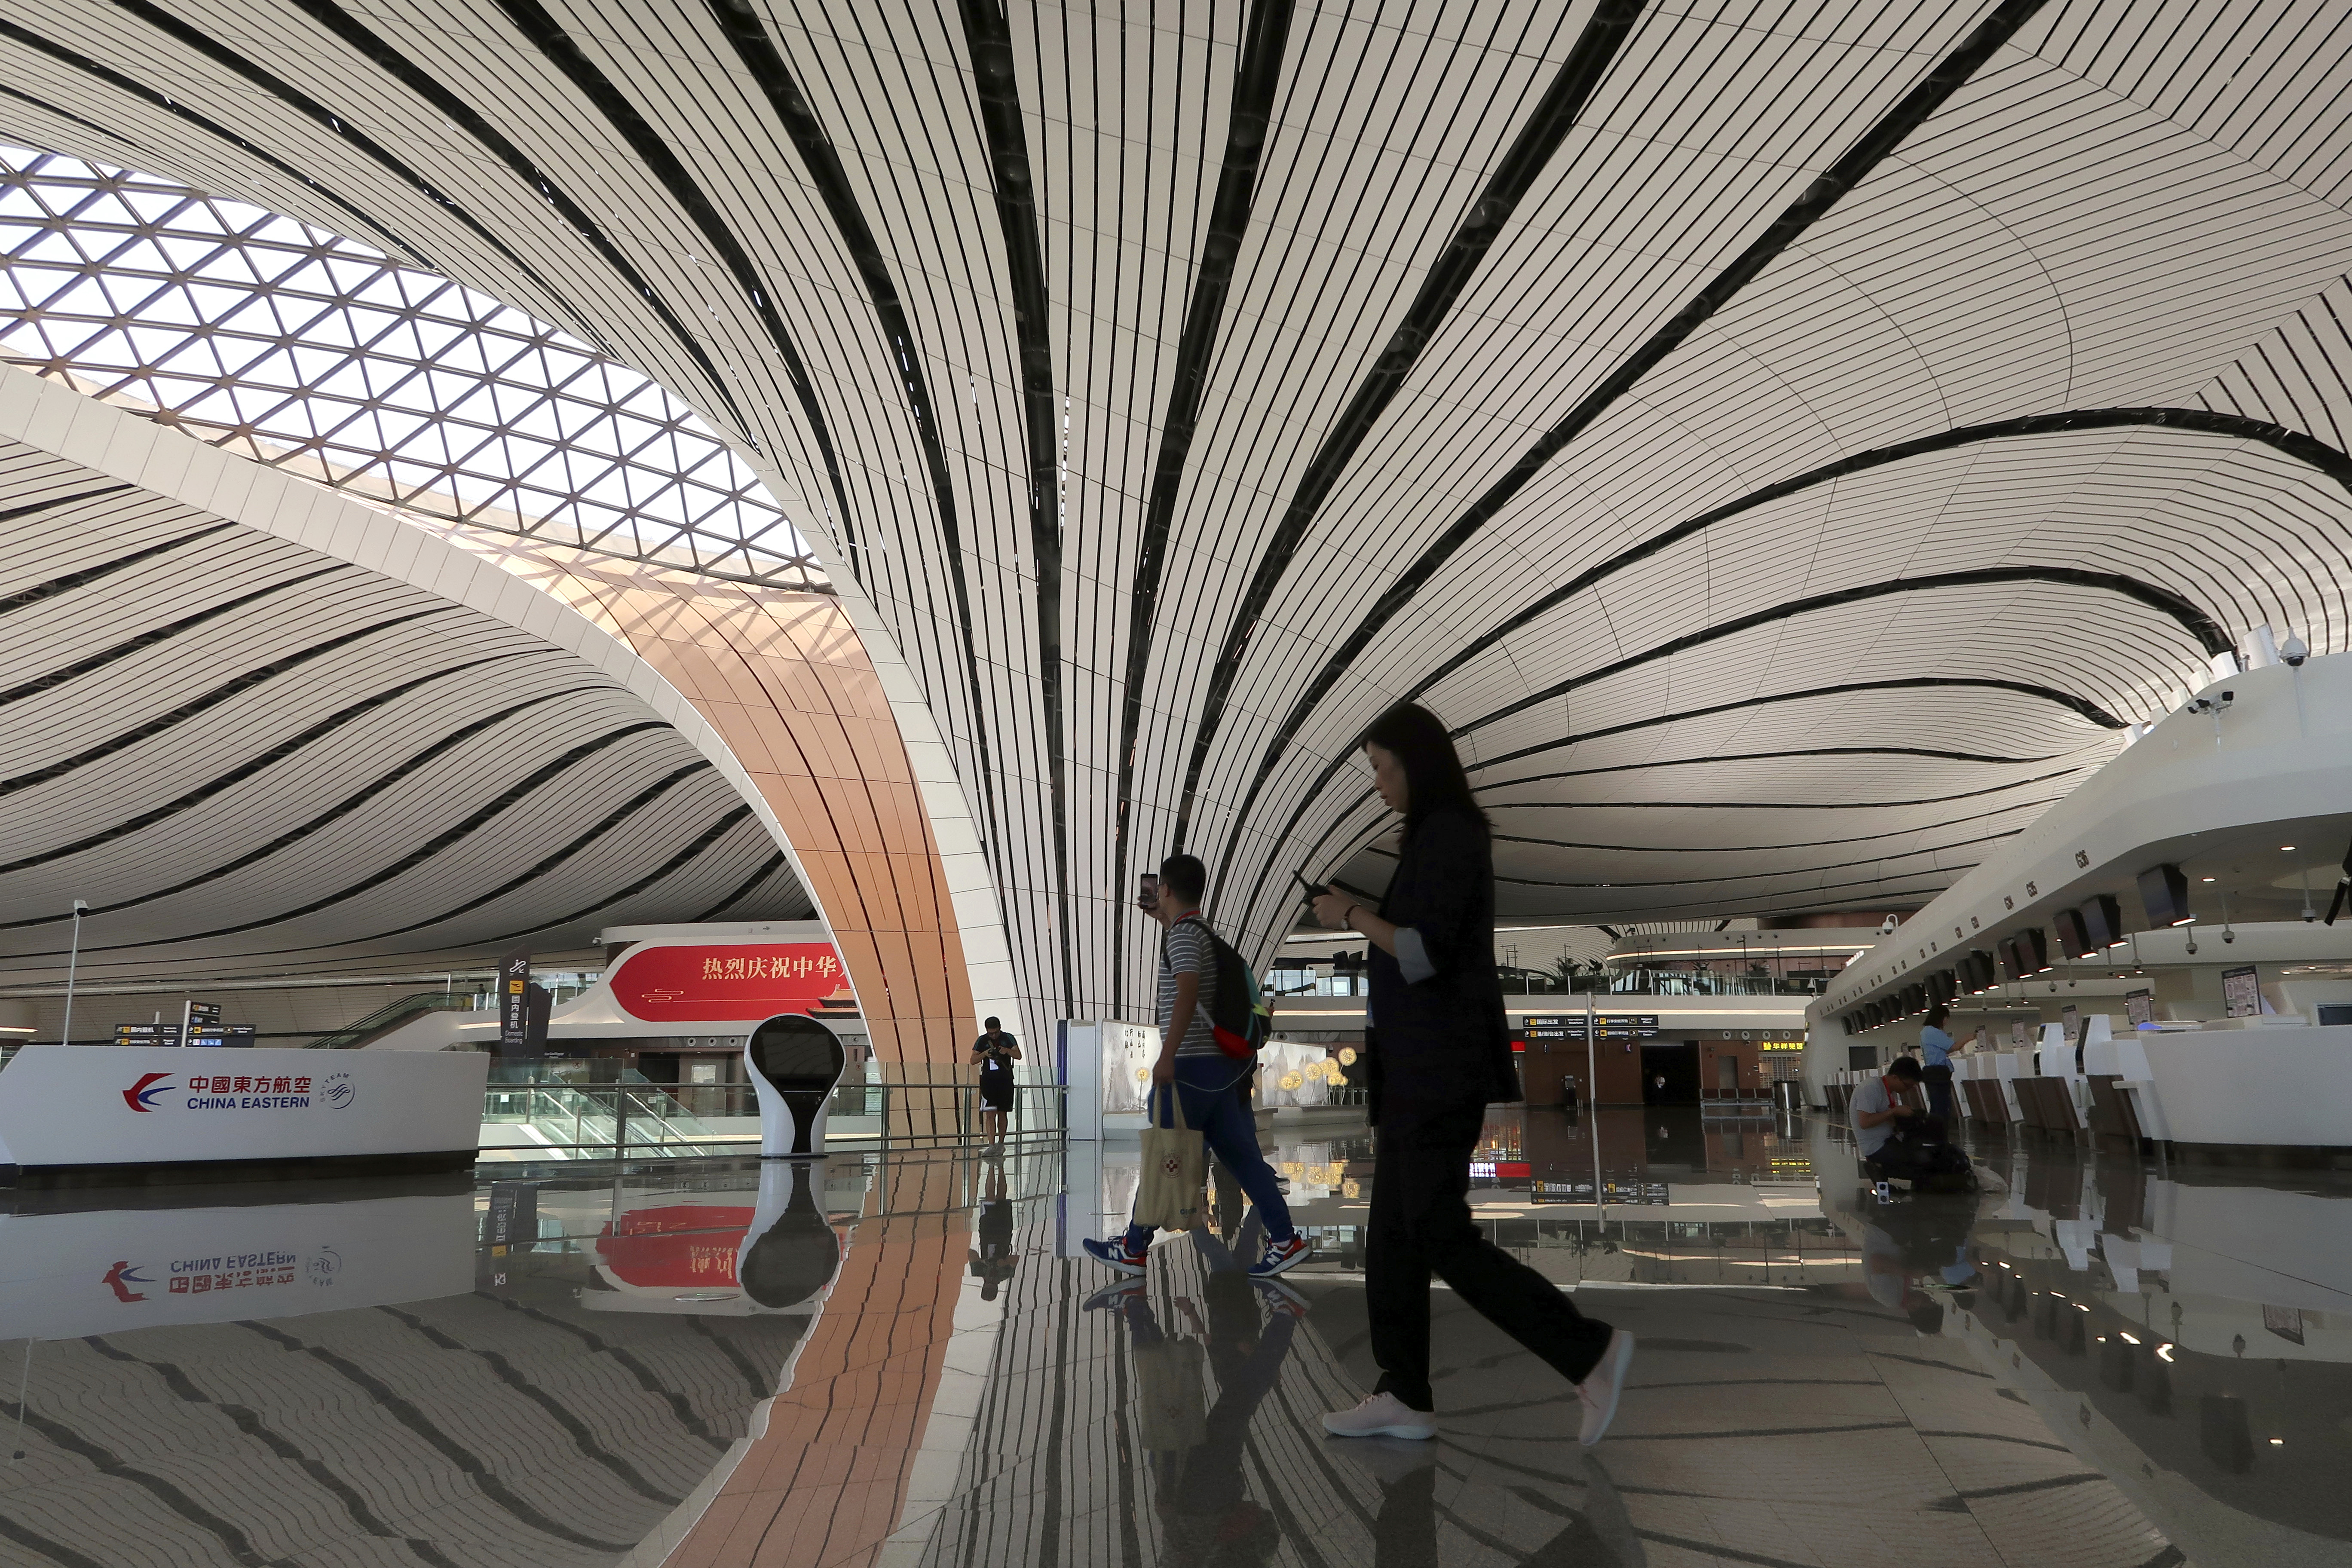 Journalists walk at the terminal hall after the launching ceremony for the new Daxing International Airport ahead of the 70th founding anniversary of the People's Republic of China in Beijing, China  Wednesday, Sept. 25, 2019. (Thomas Suen/Pool Photo via AP)